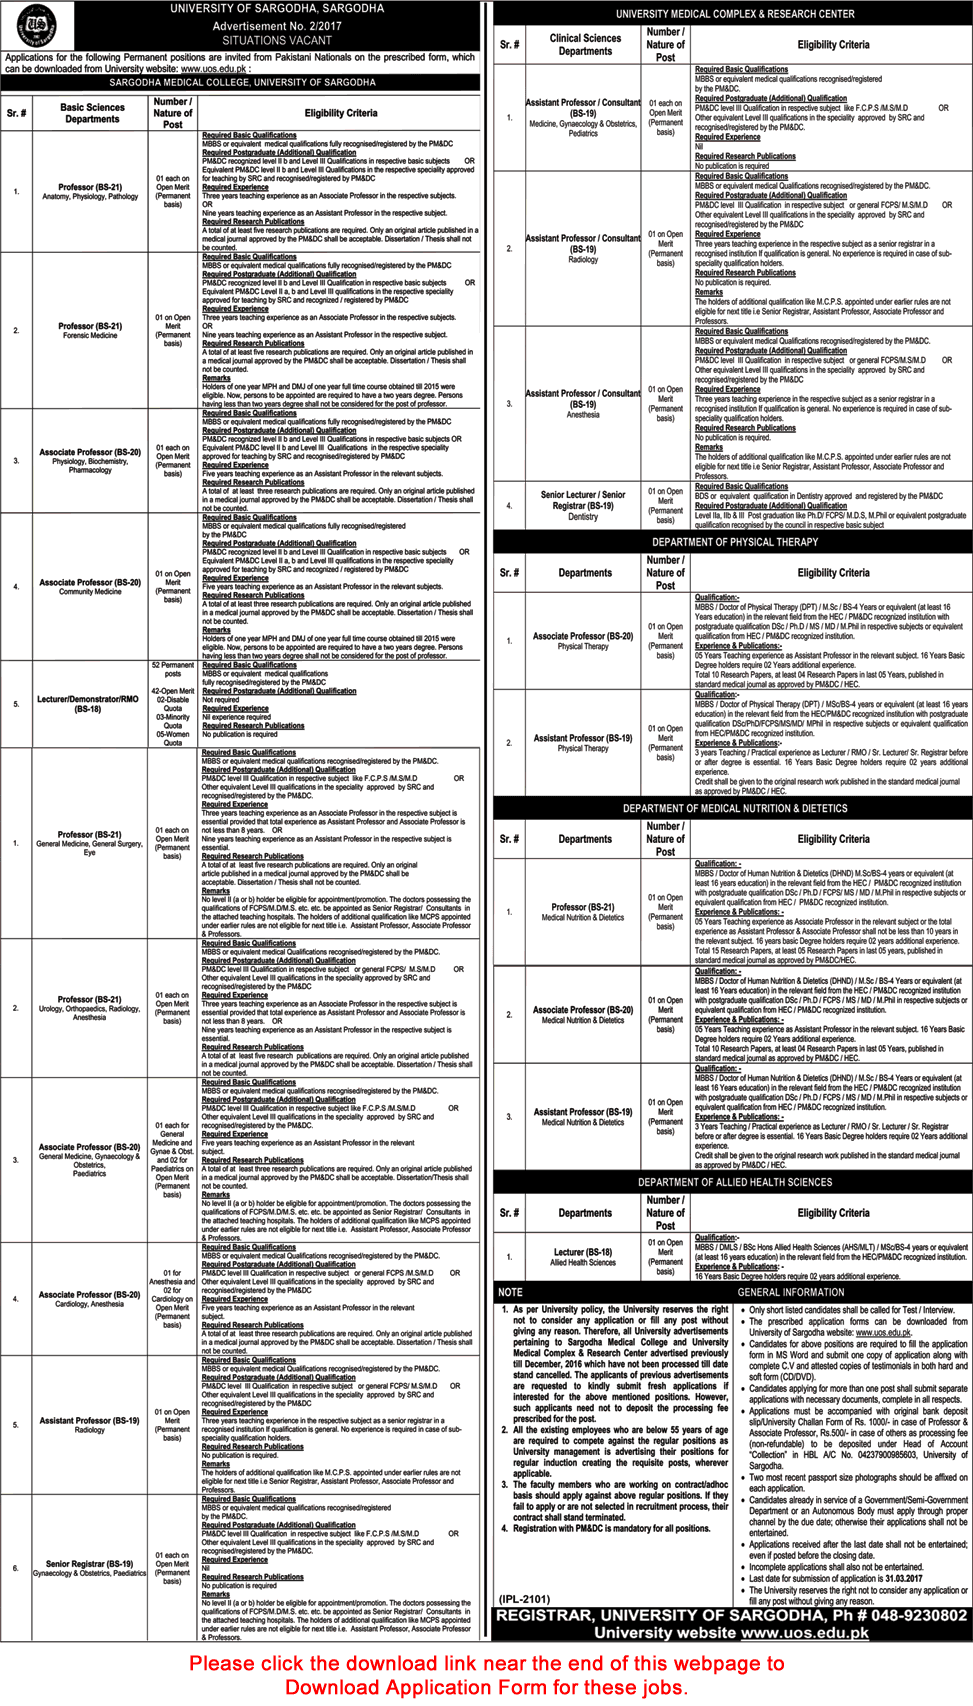 University of Sargodha Jobs March 2017 Application Form Teaching Faculty UOS Latest